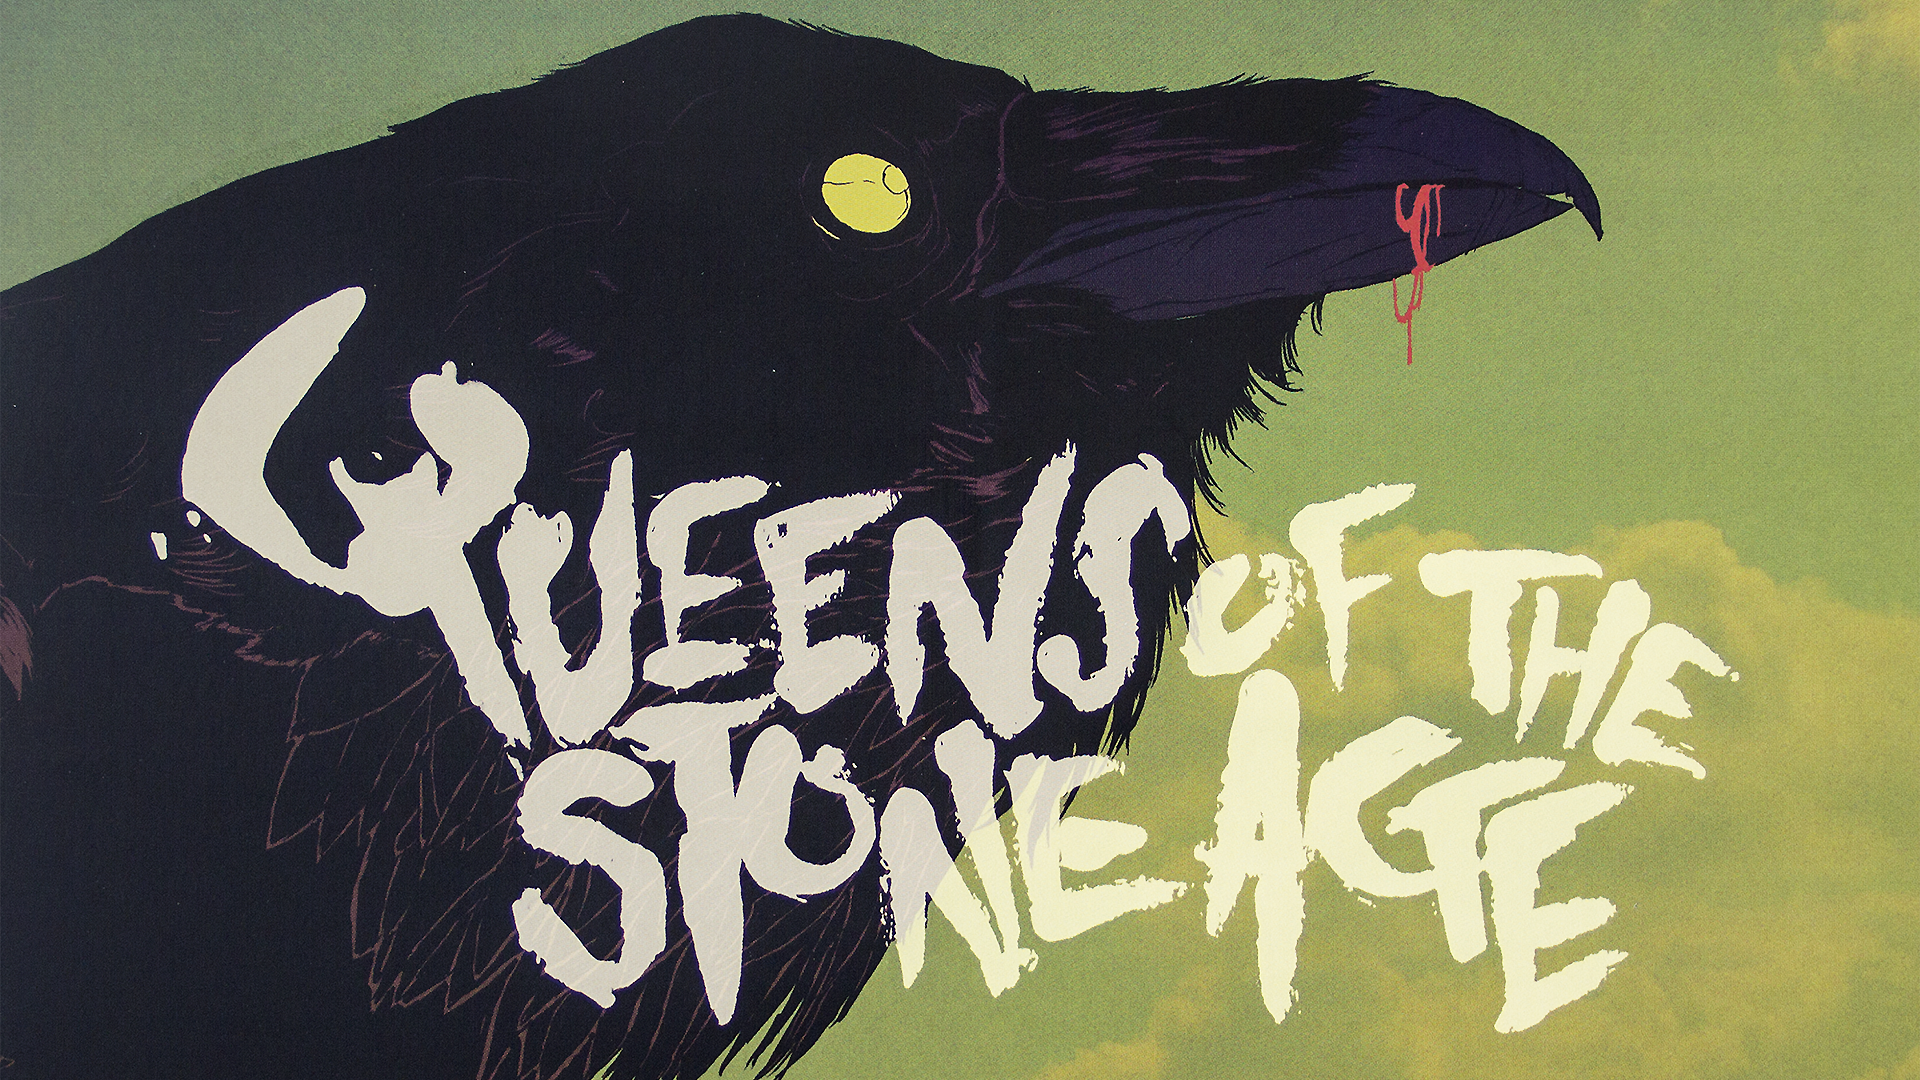 Music Queens Of The Stone Age Raven 1920x1080